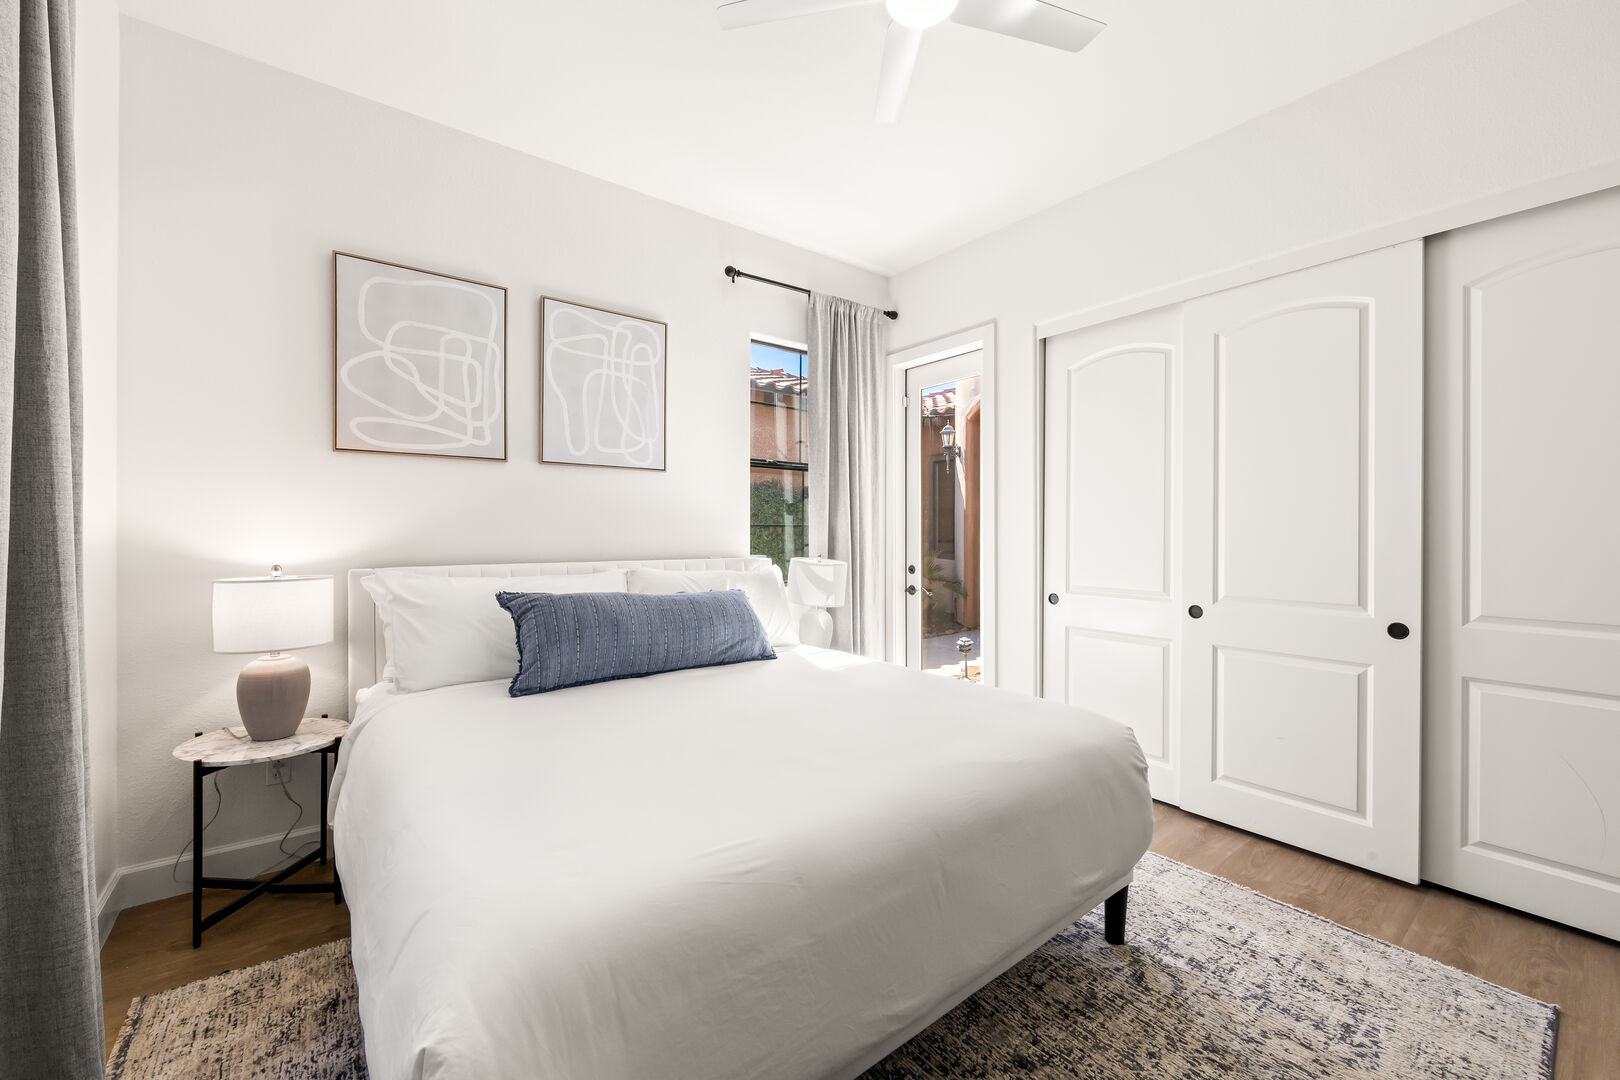 Bedroom 5 is located across Suite 2 and features a King-sized Bed, 55-inch Samsung 4K Smart television, remote-controlled ceiling fan, and a large reach-in closet.